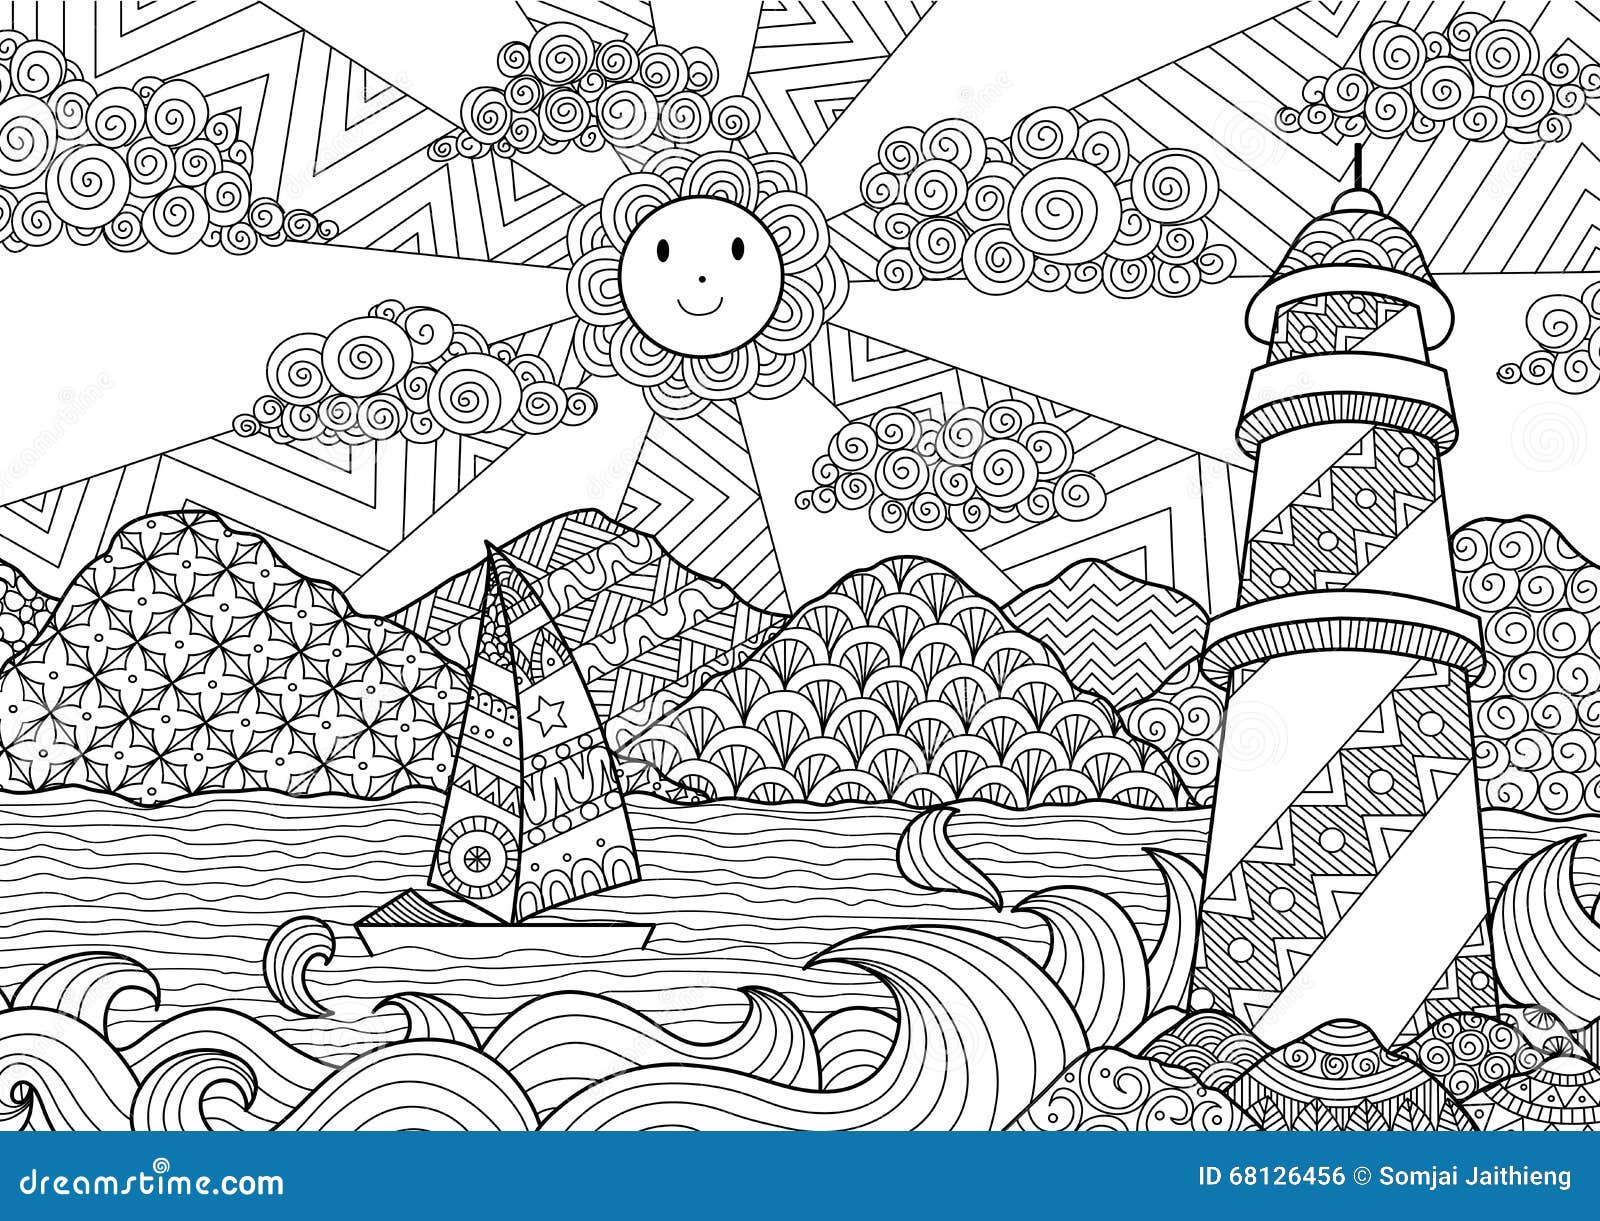 Seascape line art design for coloring book for adult anti stress coloring